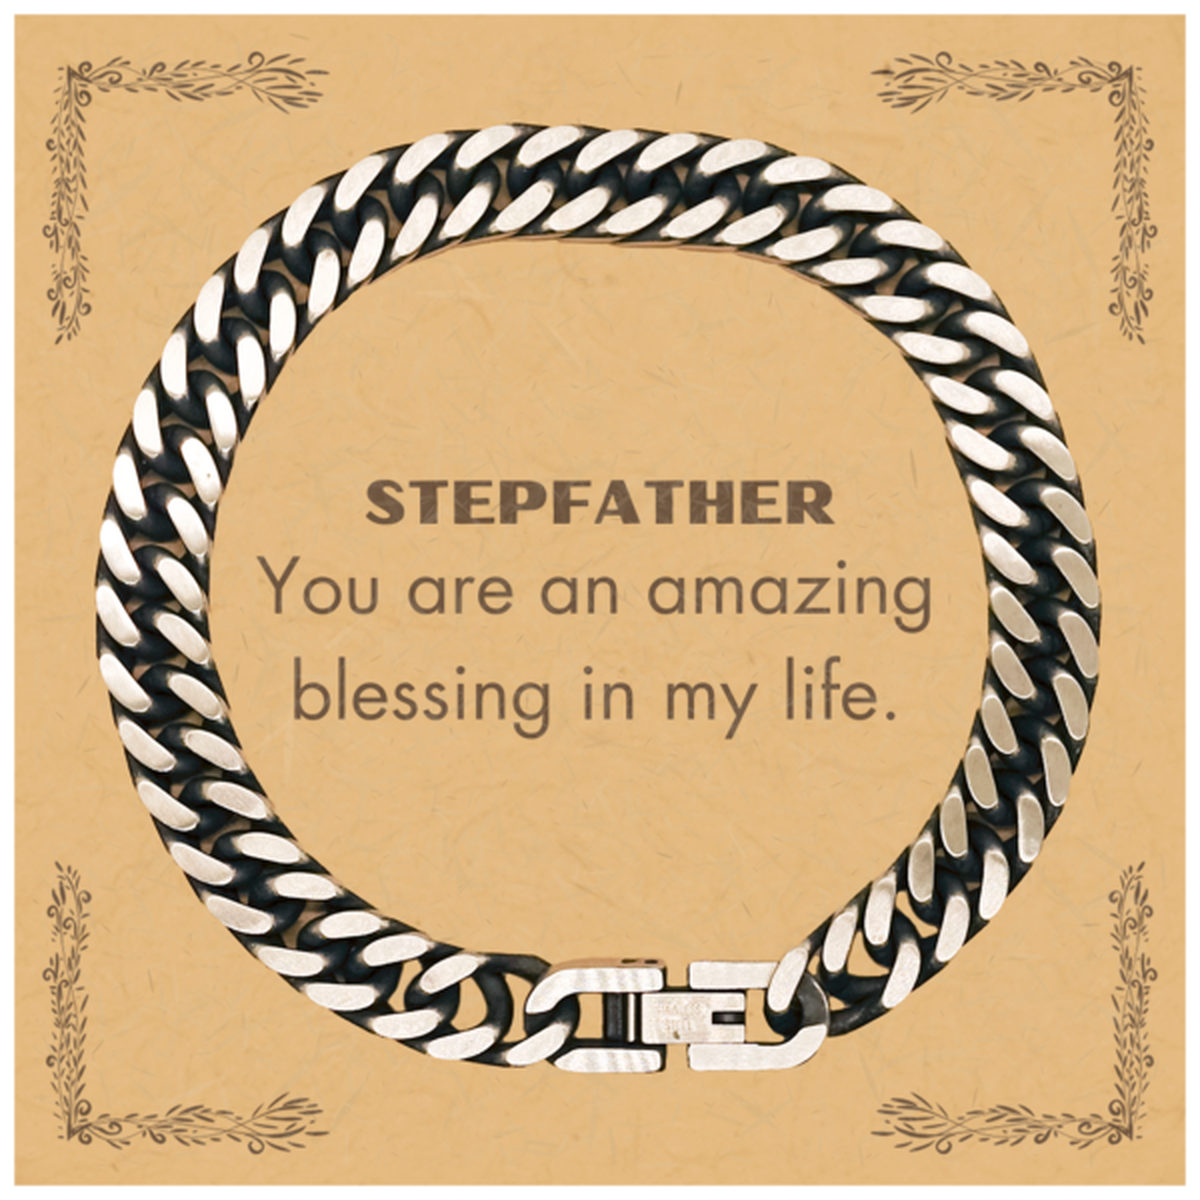 Stepfather Cuban Link Chain Bracelet, You are an amazing blessing in my life, Thank You Gifts For Stepfather, Inspirational Birthday Christmas Unique Gifts For Stepfather